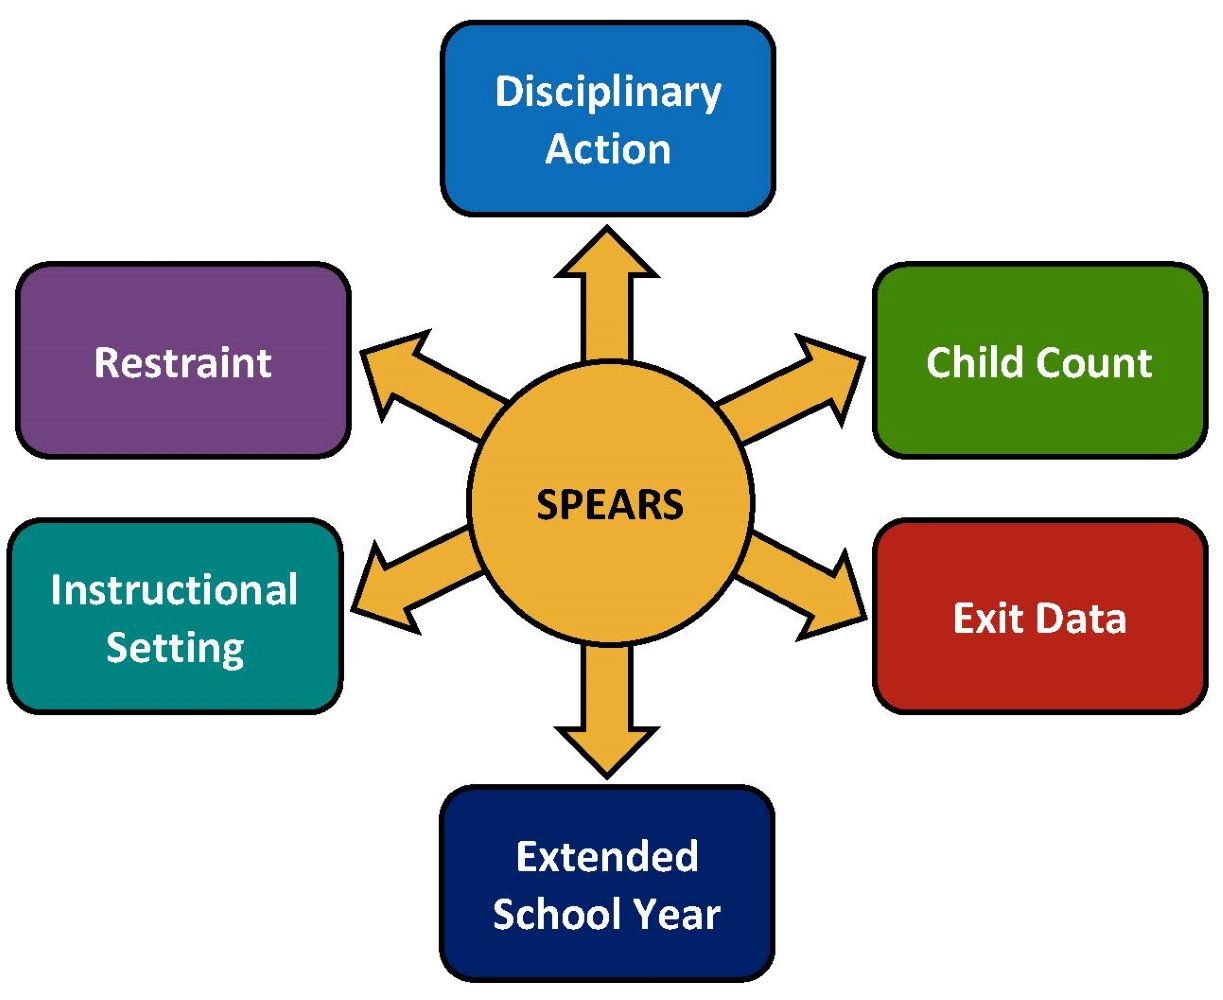 SPEARS: Disciplinary Action, Child Count, Exit Data, Extended School Year, Instructional Setting, Restraint